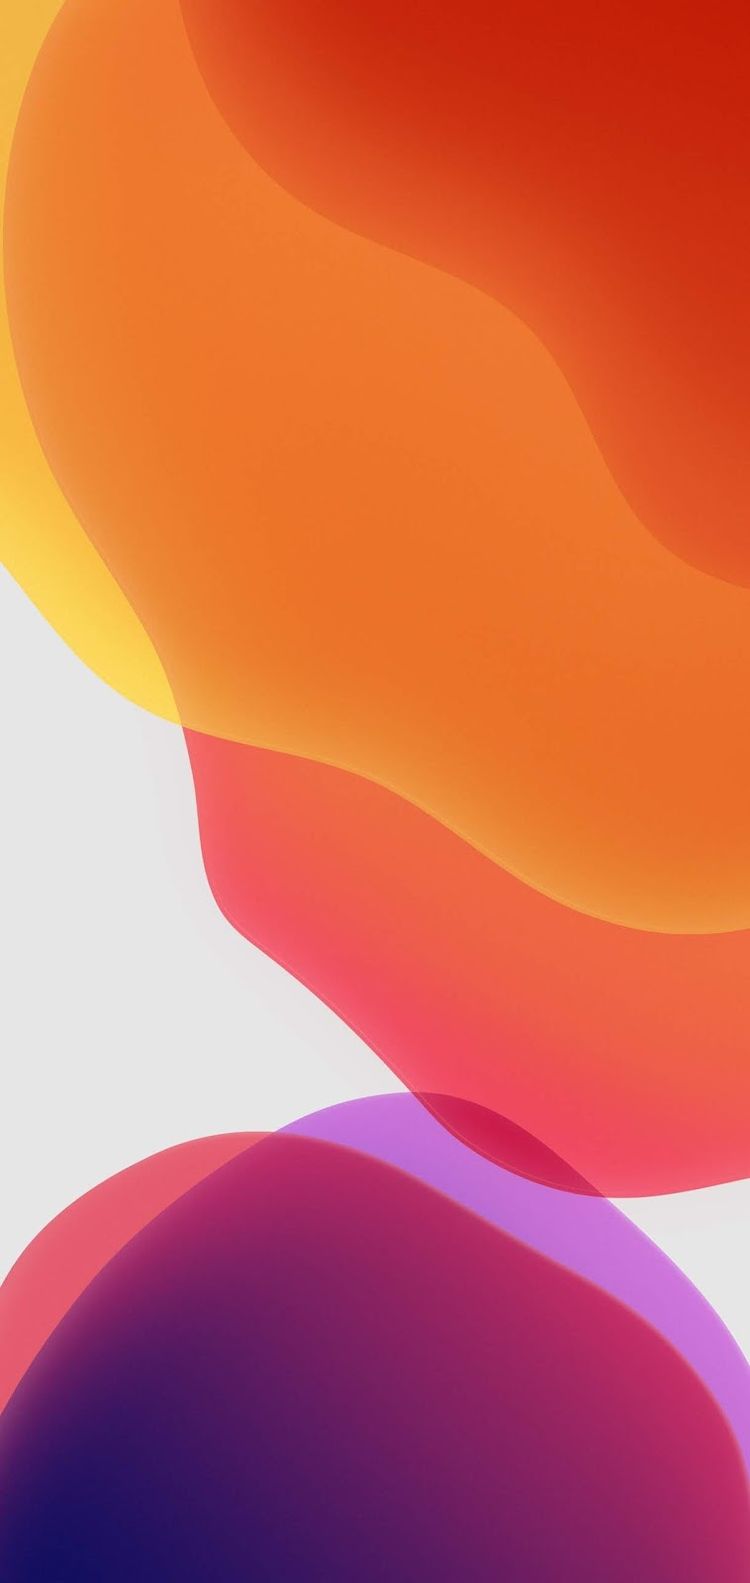 iOS 1 Wallpapers